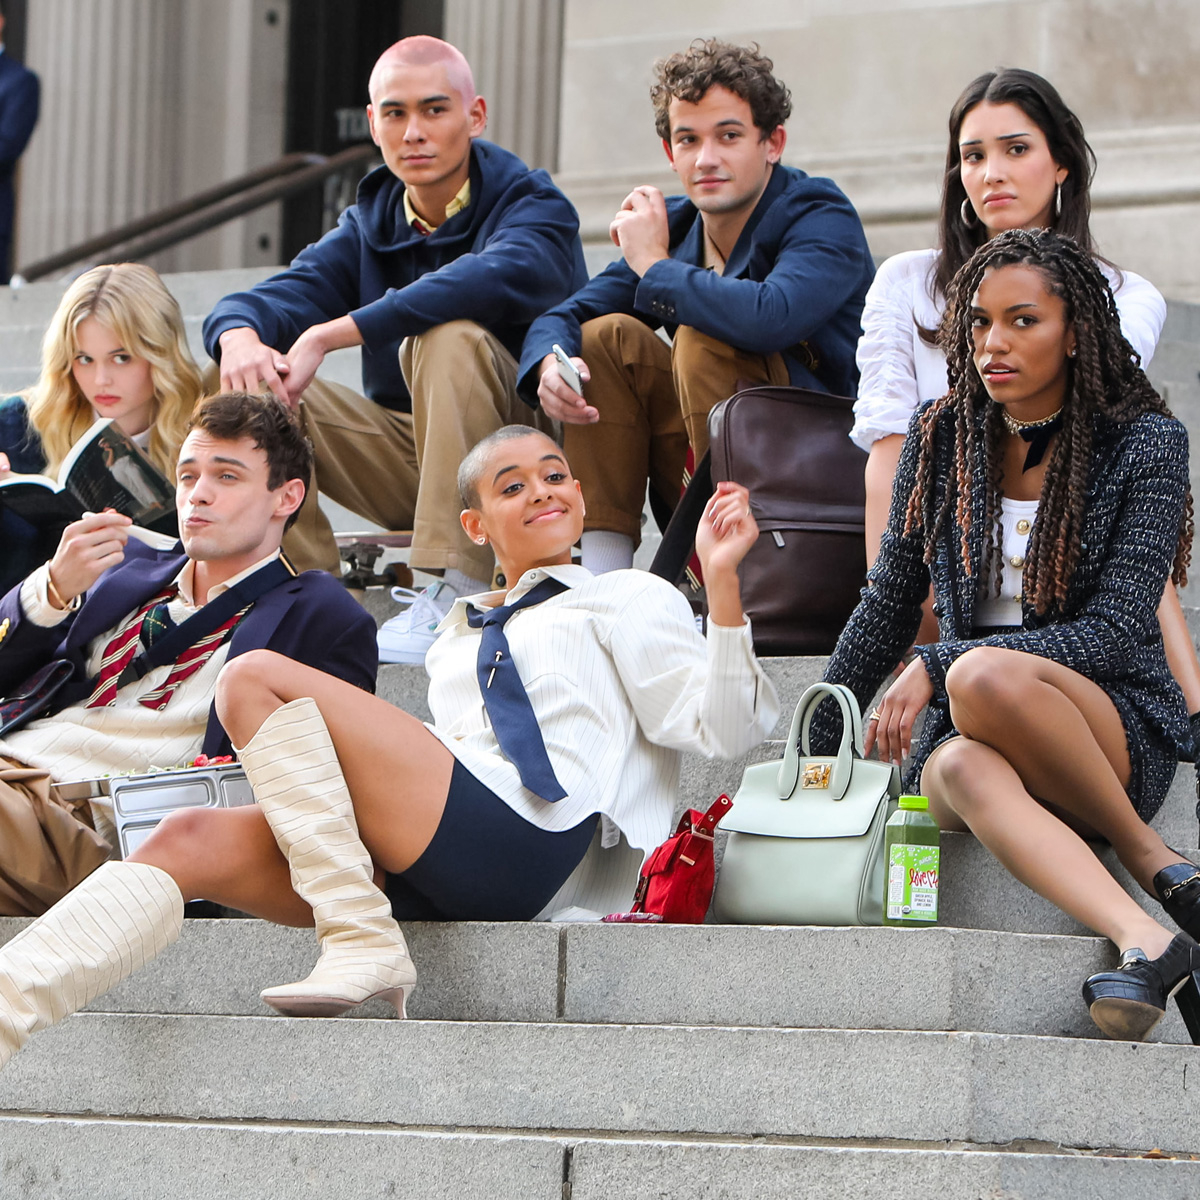 The New Gossip Girl Might Be Coming Sooner Than You Think